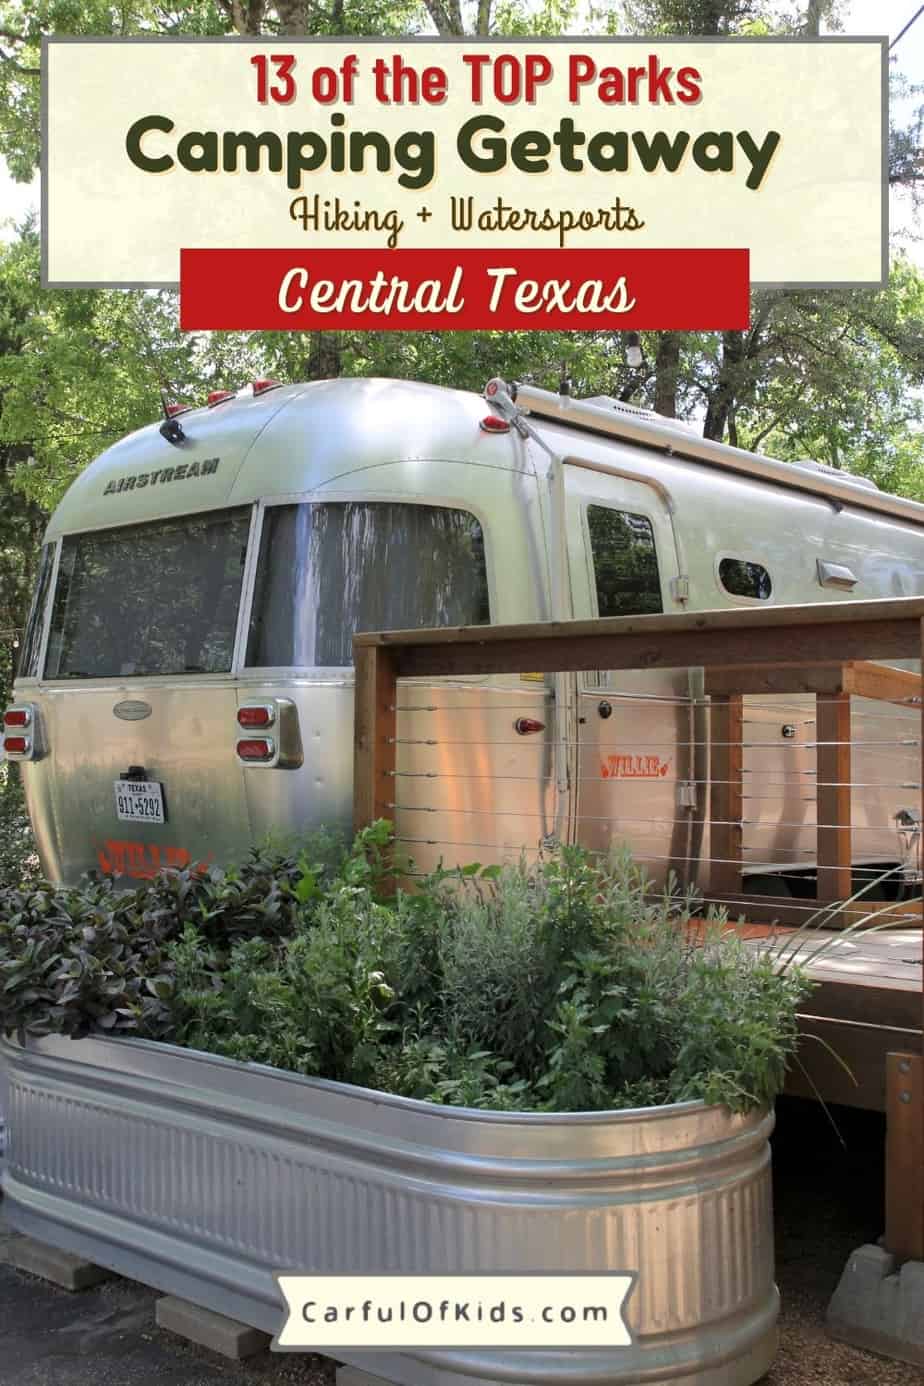 Pack up for a weekend in the woods around Central Texas. Here's 13 top parks for a camping trip or day trip. With lakes galore, you can boat, paddleboat or canoe. Find campsites, cabins and even Airstreams to rent. Heres the best Texas State Parks, LCRA parks and regional parks around Austin and in the Hill Country. Where to camp near Austin | Best State Parks in the Texas Hill Country | Cabin in the Hill Country | Airstreams in Texas to rent #camping #TexasParks